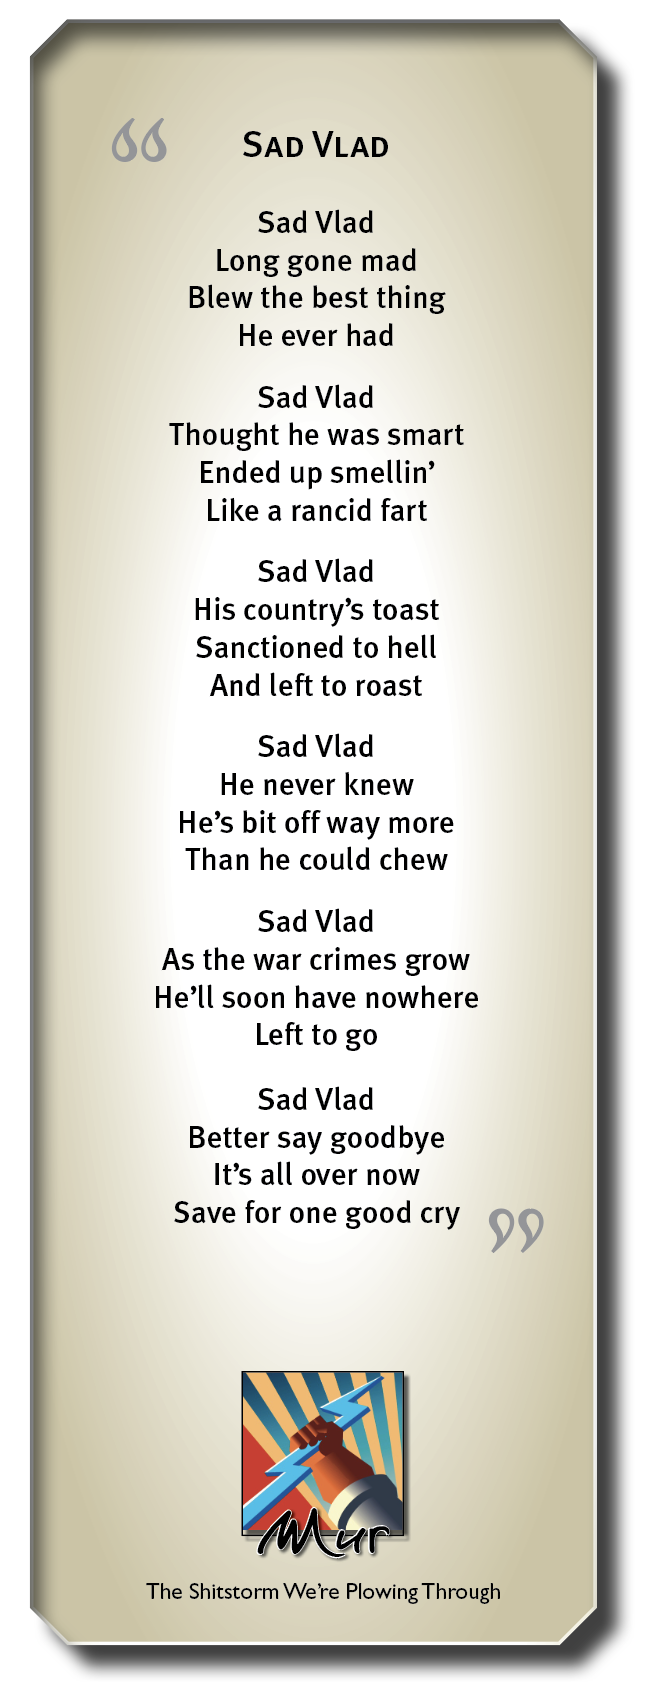 66 SAD VLAD

Sad Vlad
Long gone mad
Blew the best thing
He ever had

Sad Vlad
Thought he was smart
Ended up smellin’
Like a rancid fart

Sad Vlad
His country’s toast
Sanctioned to hell
And left to roast

Sad Vlad
He never knew
He's bit off way more
Than he could chew

Sad Vlad
As the war crimes grow
He’ll soon have nowhere
Left to go

Sad Vlad
Better say goodbye
It’s all over now
Save for one good cry 09

The Shitstorm We're Plowing Through